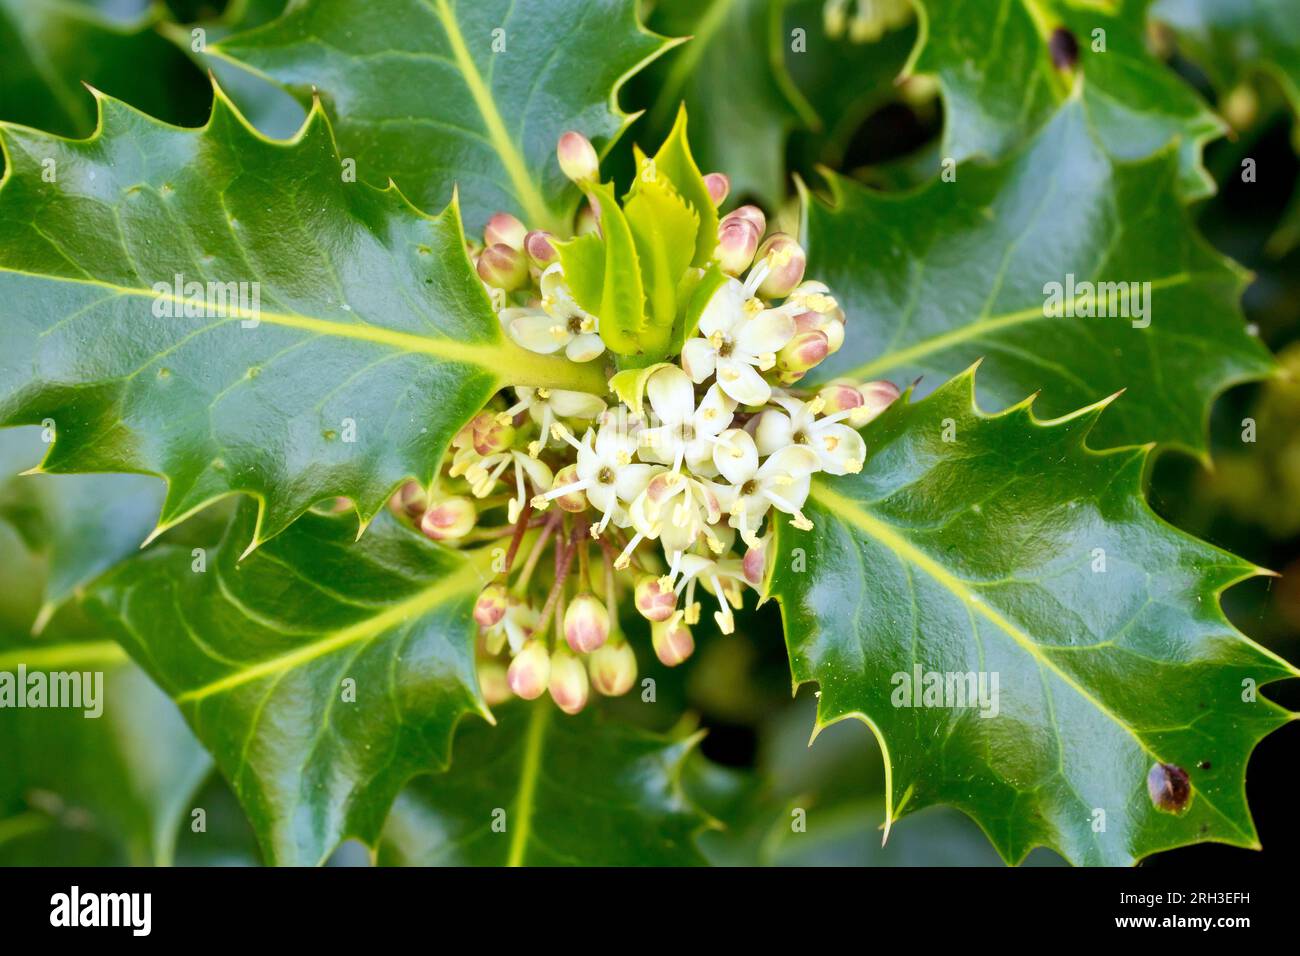 Holly (ilex aquifolium), close up showing a cluster of white male flowers growing at the end of a branch surrounded by the spiny leaves. Stock Photo